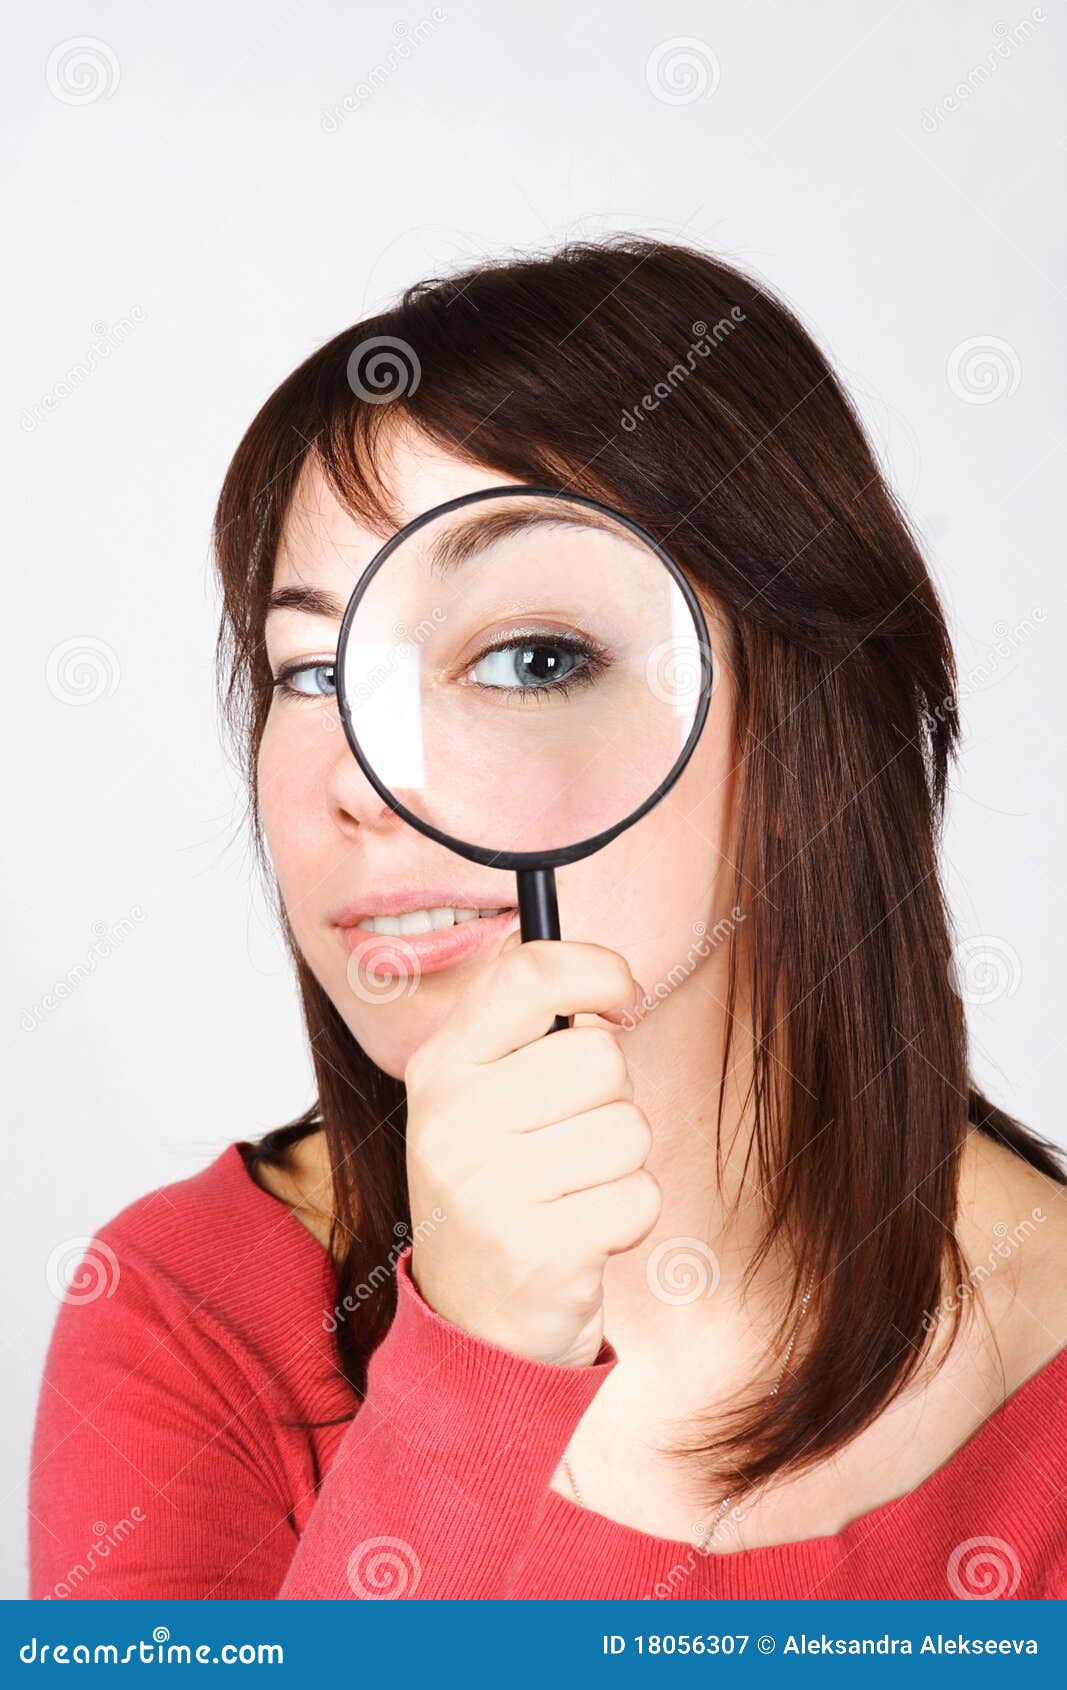 woman holding magnifier and looking through it